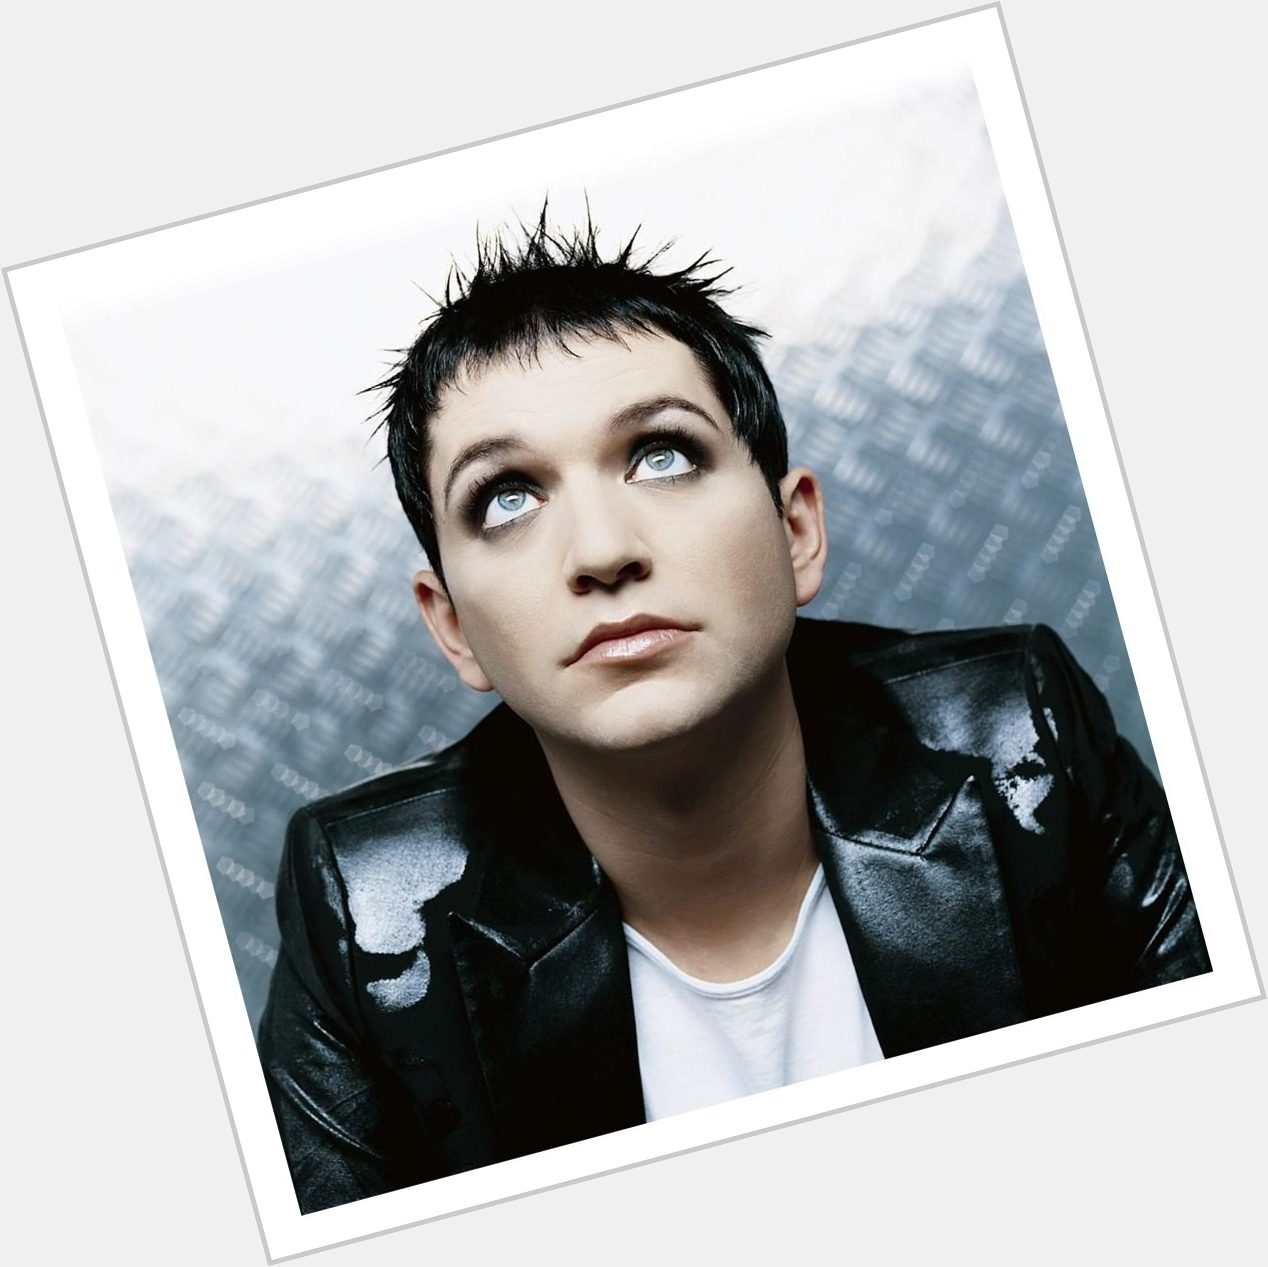 Happy Birthday Wishes to \s Brian Molko. Have a great day      